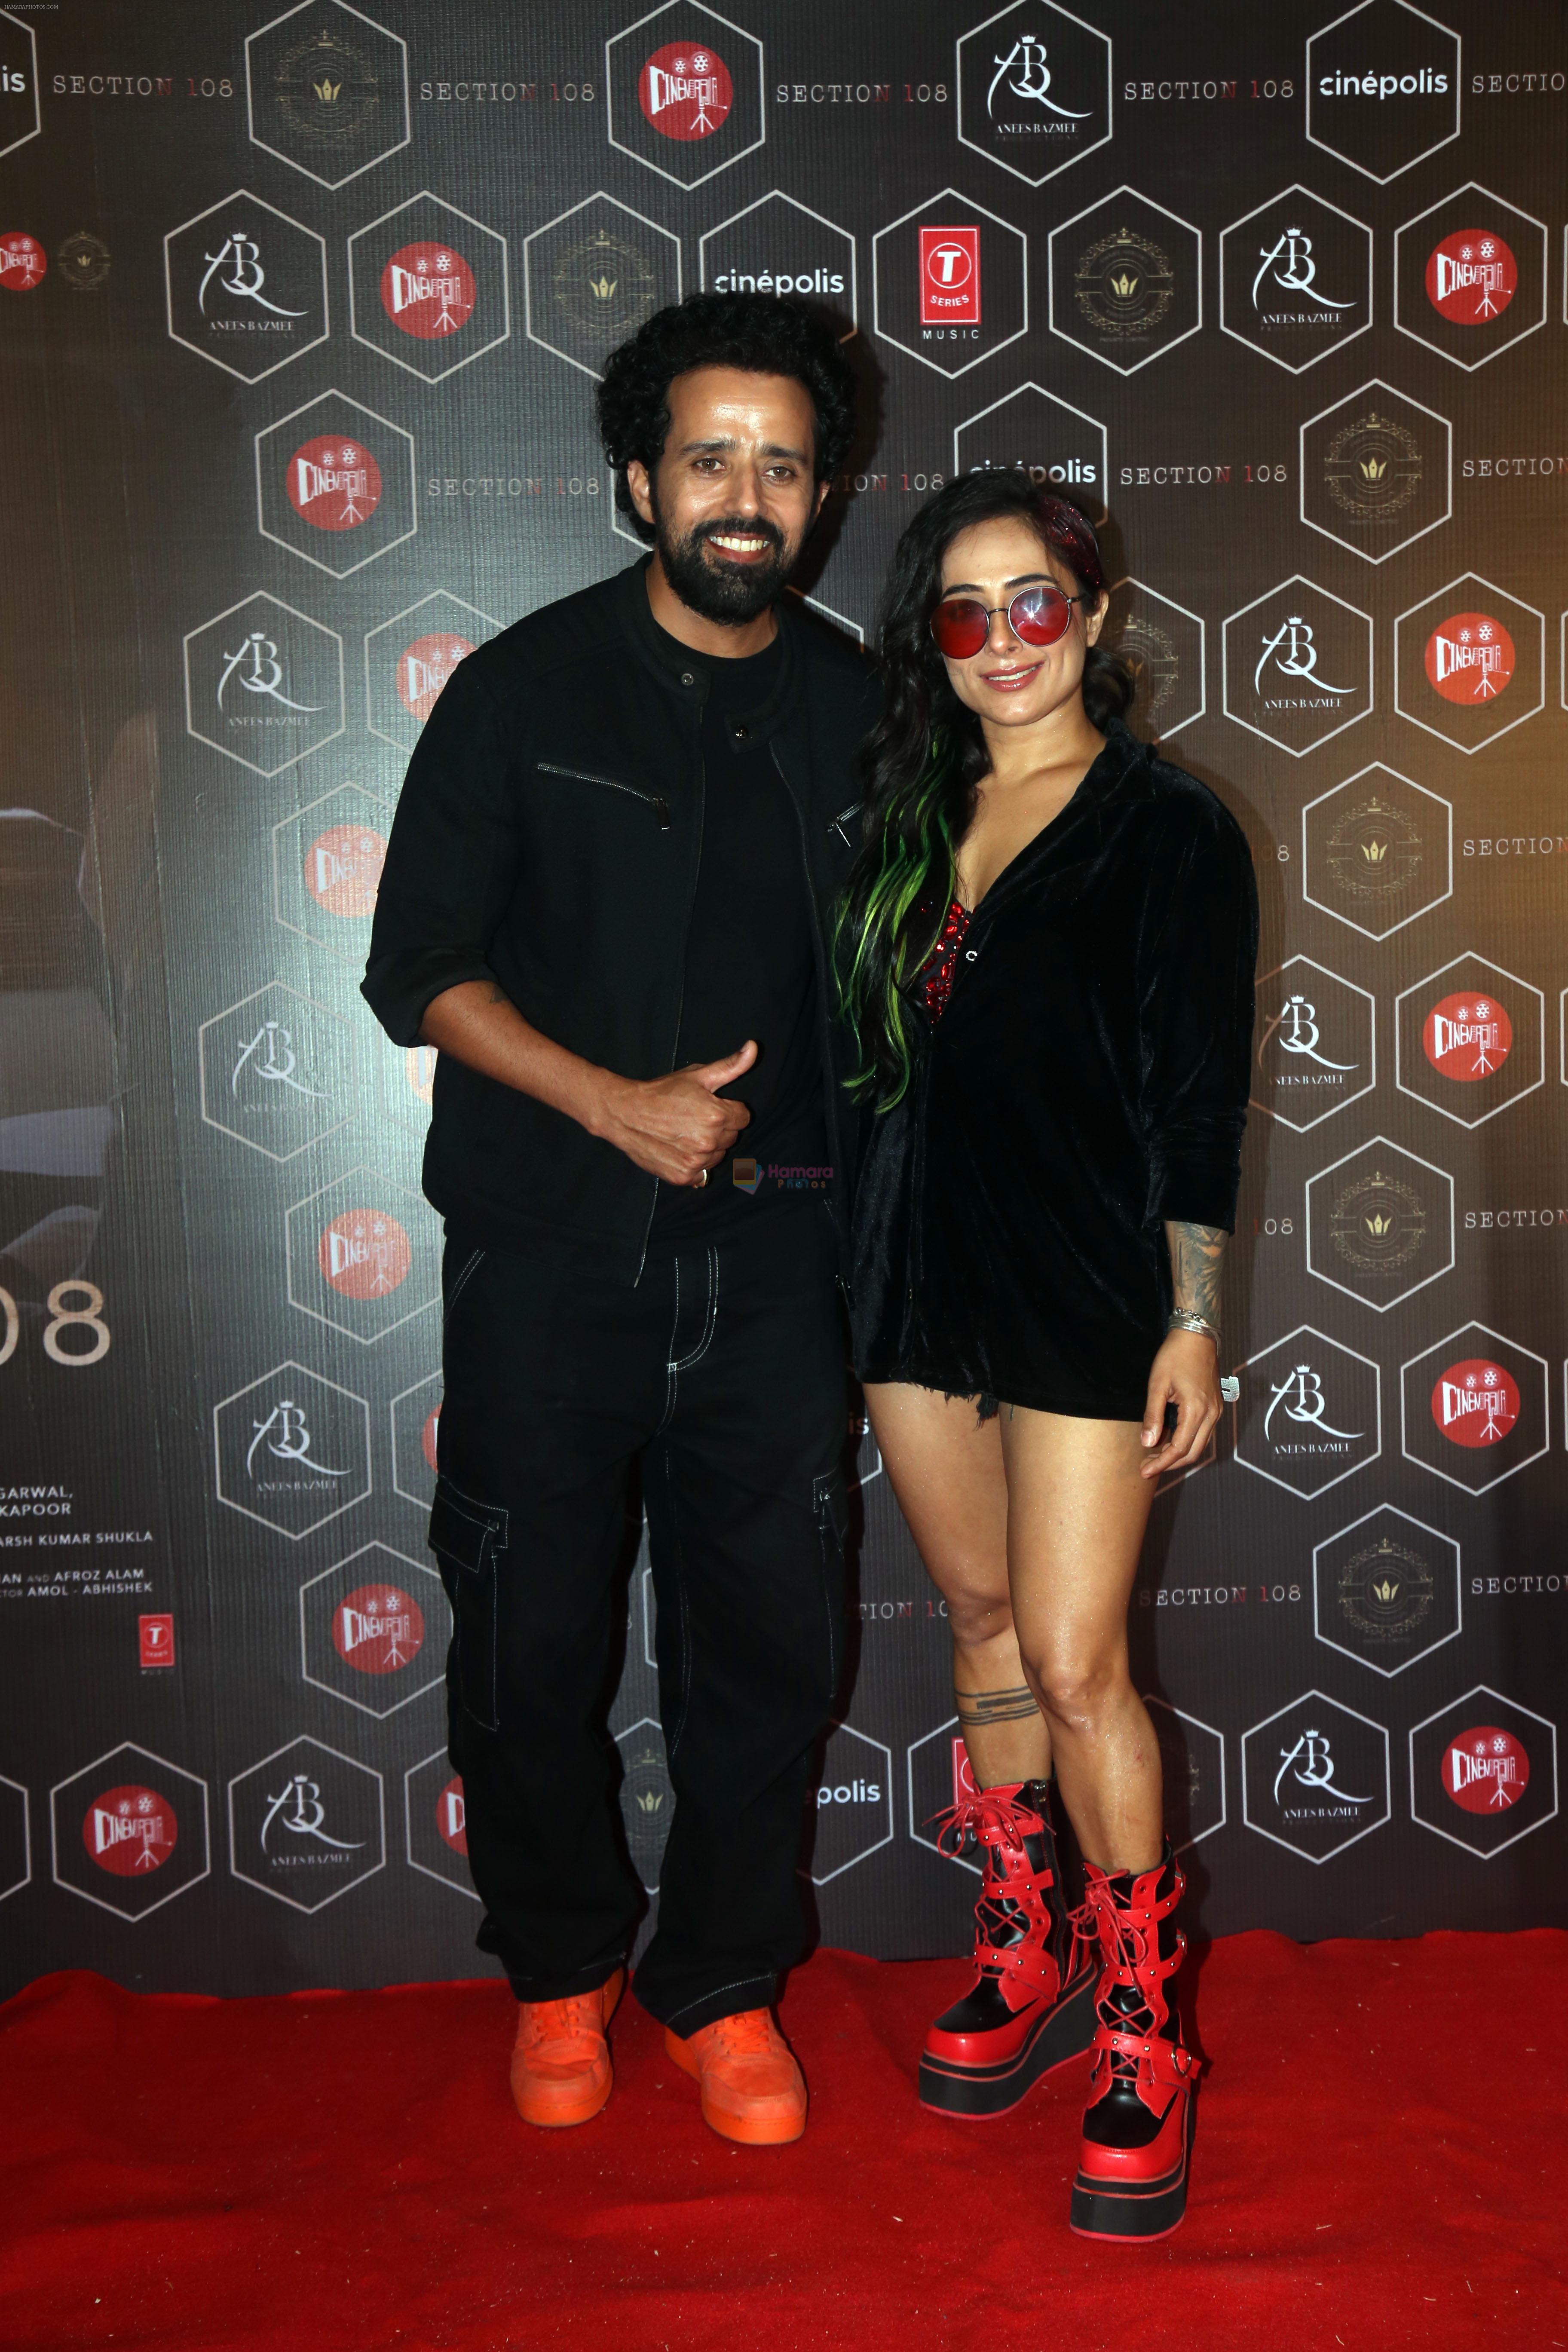 Anil Charanjeett, Shweta Mehta at the launch of film Section 108 Teaser on 27th August 2023